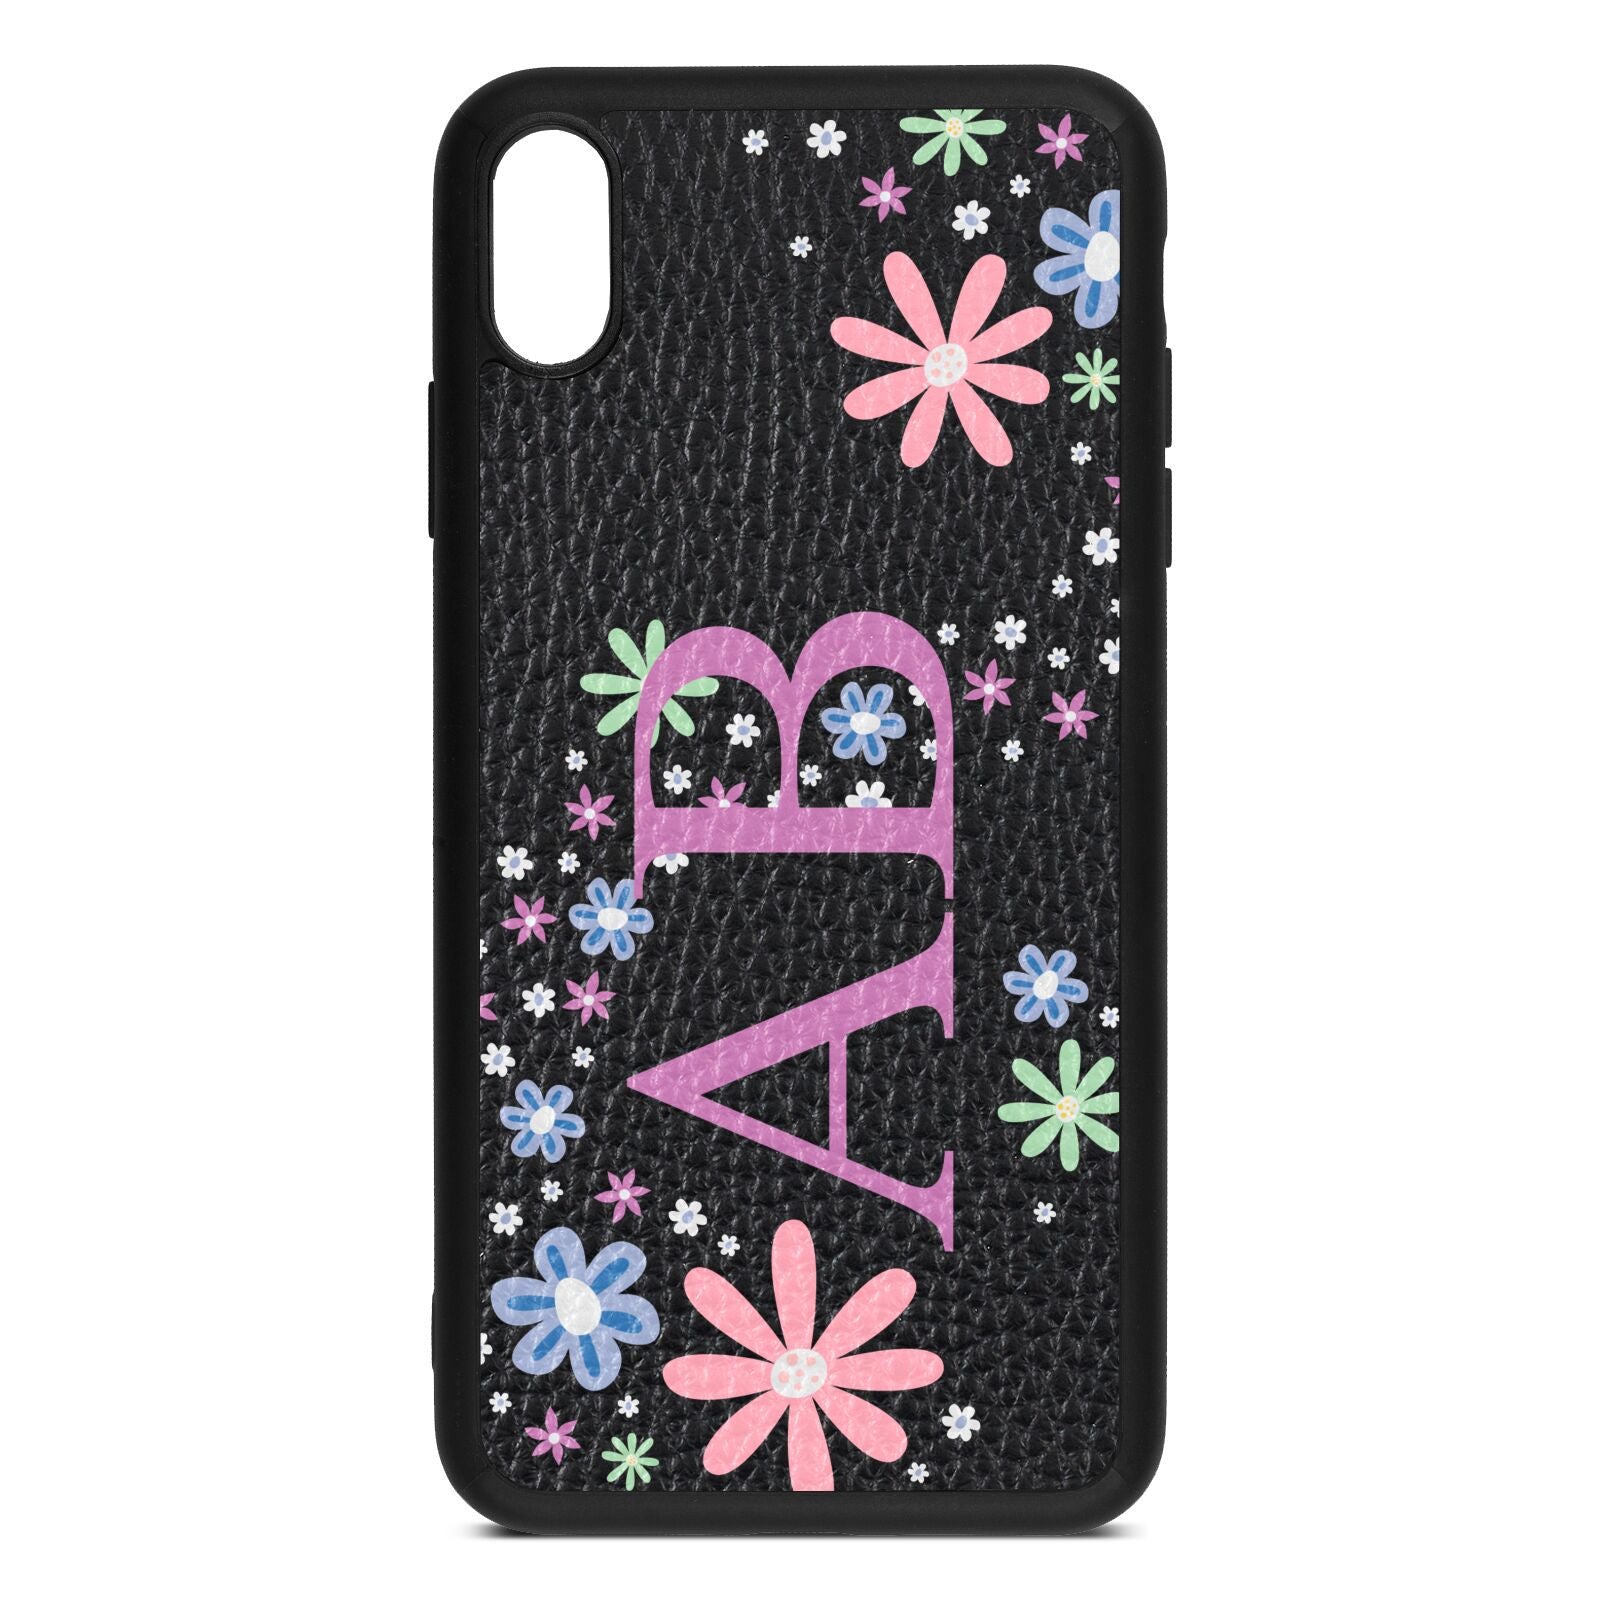 Personalised Floral Initials Black Pebble Leather iPhone Xs Max Case